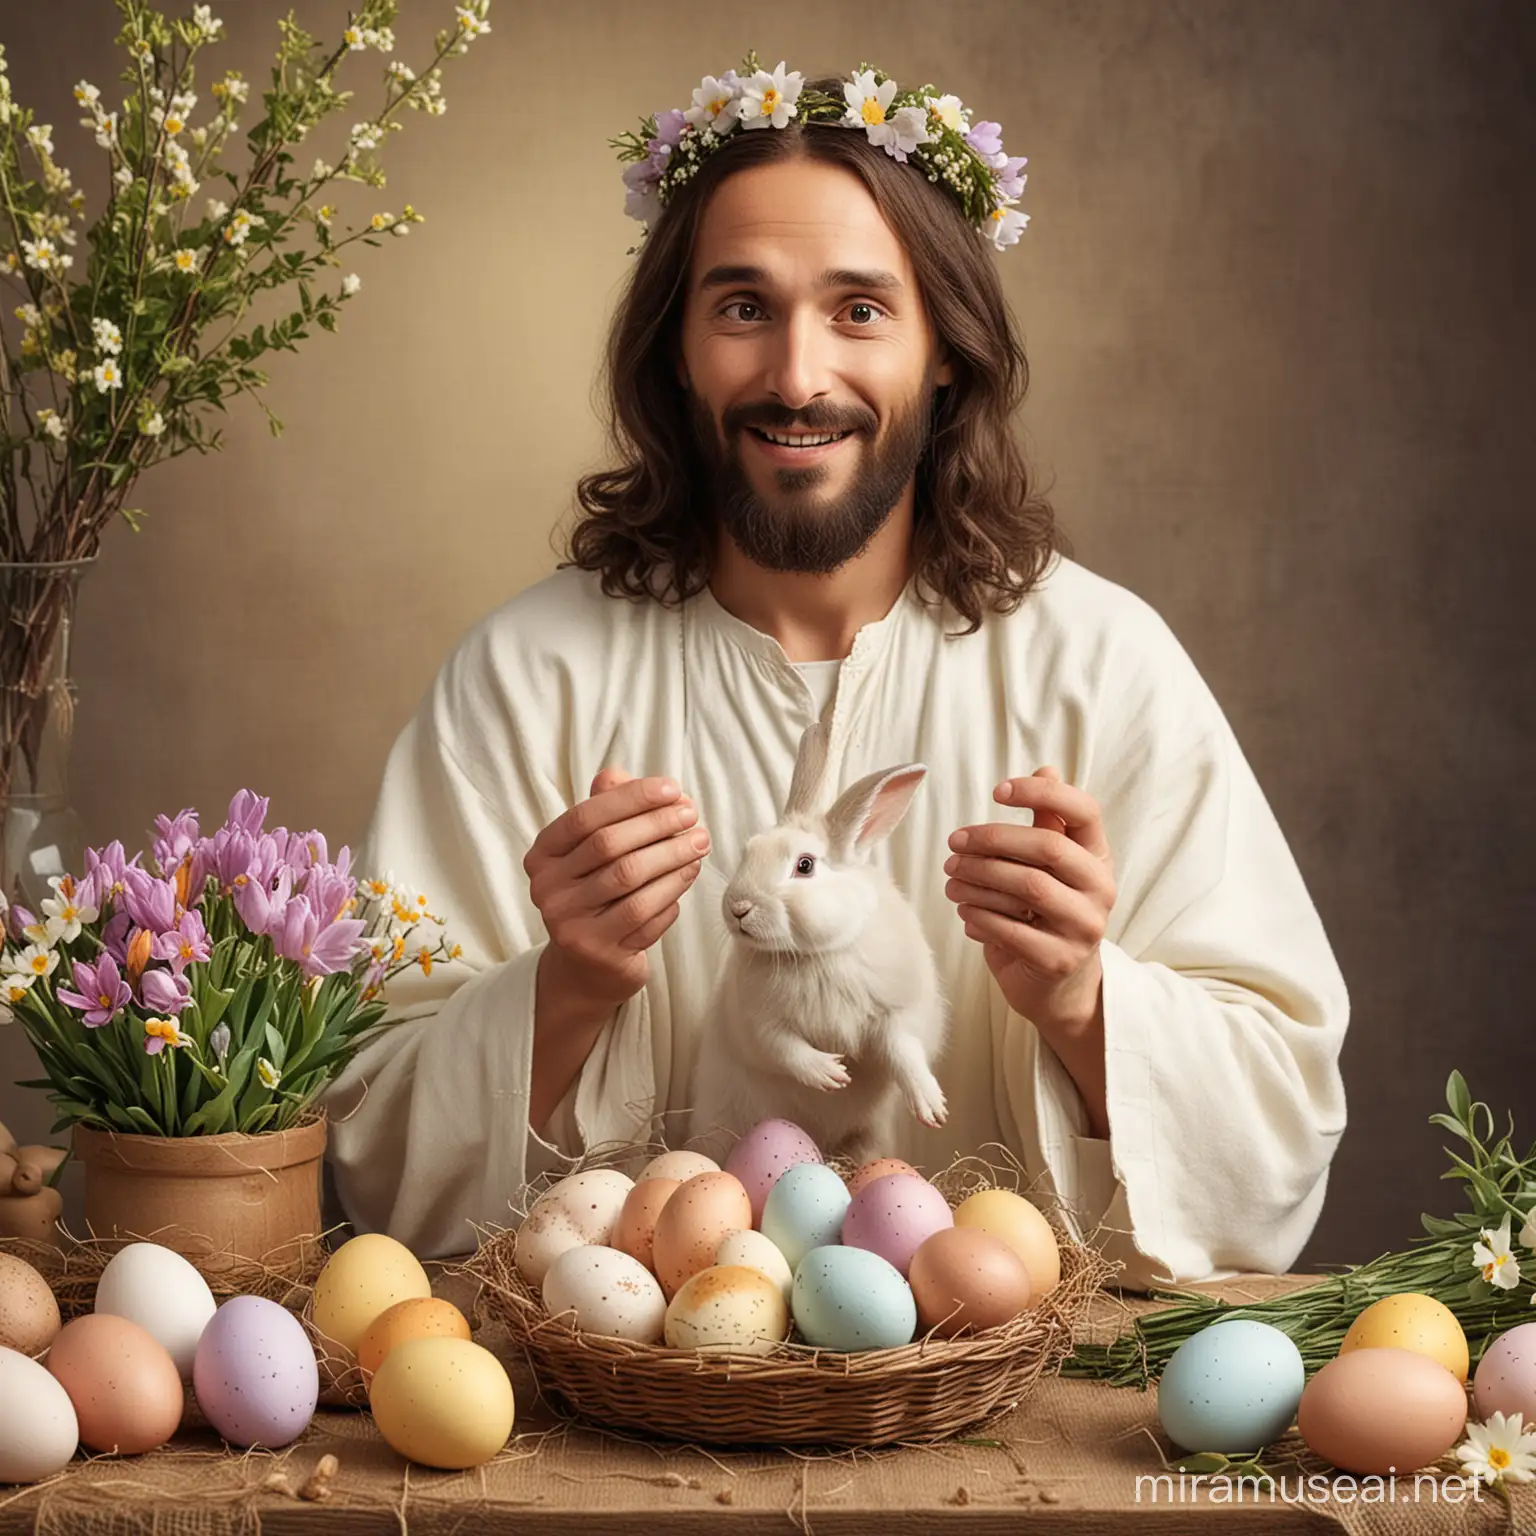  Funny Jesus with a rabbit, easter eggs and flowers
